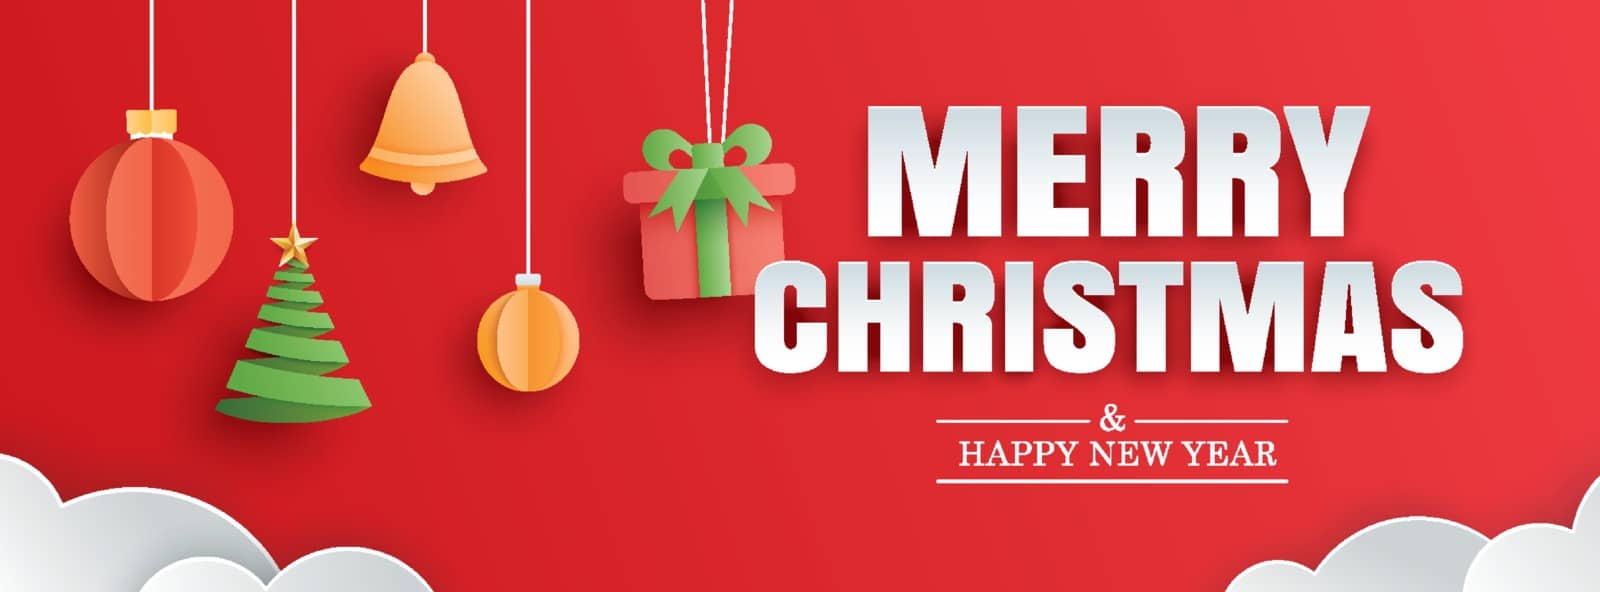 Merry christmas and happy new year red greeting card in paper art banner template. Use for header website, cover, flyer.